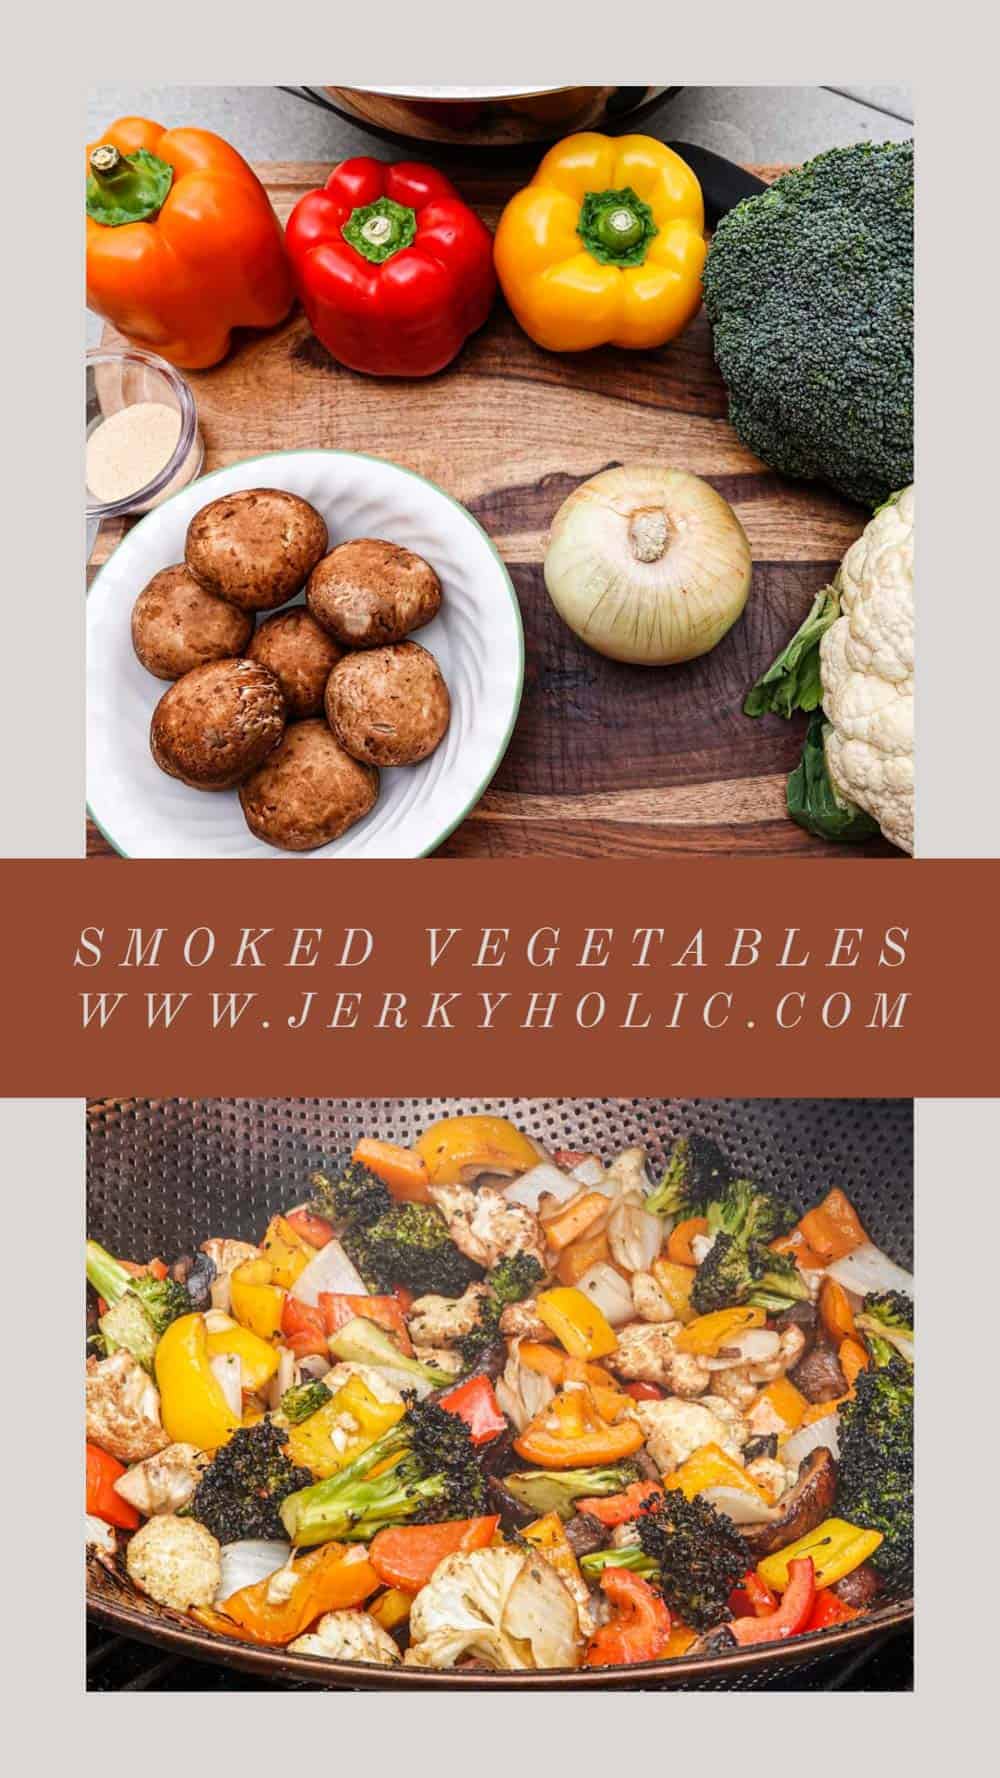 Crunchy Smoked Vegetables